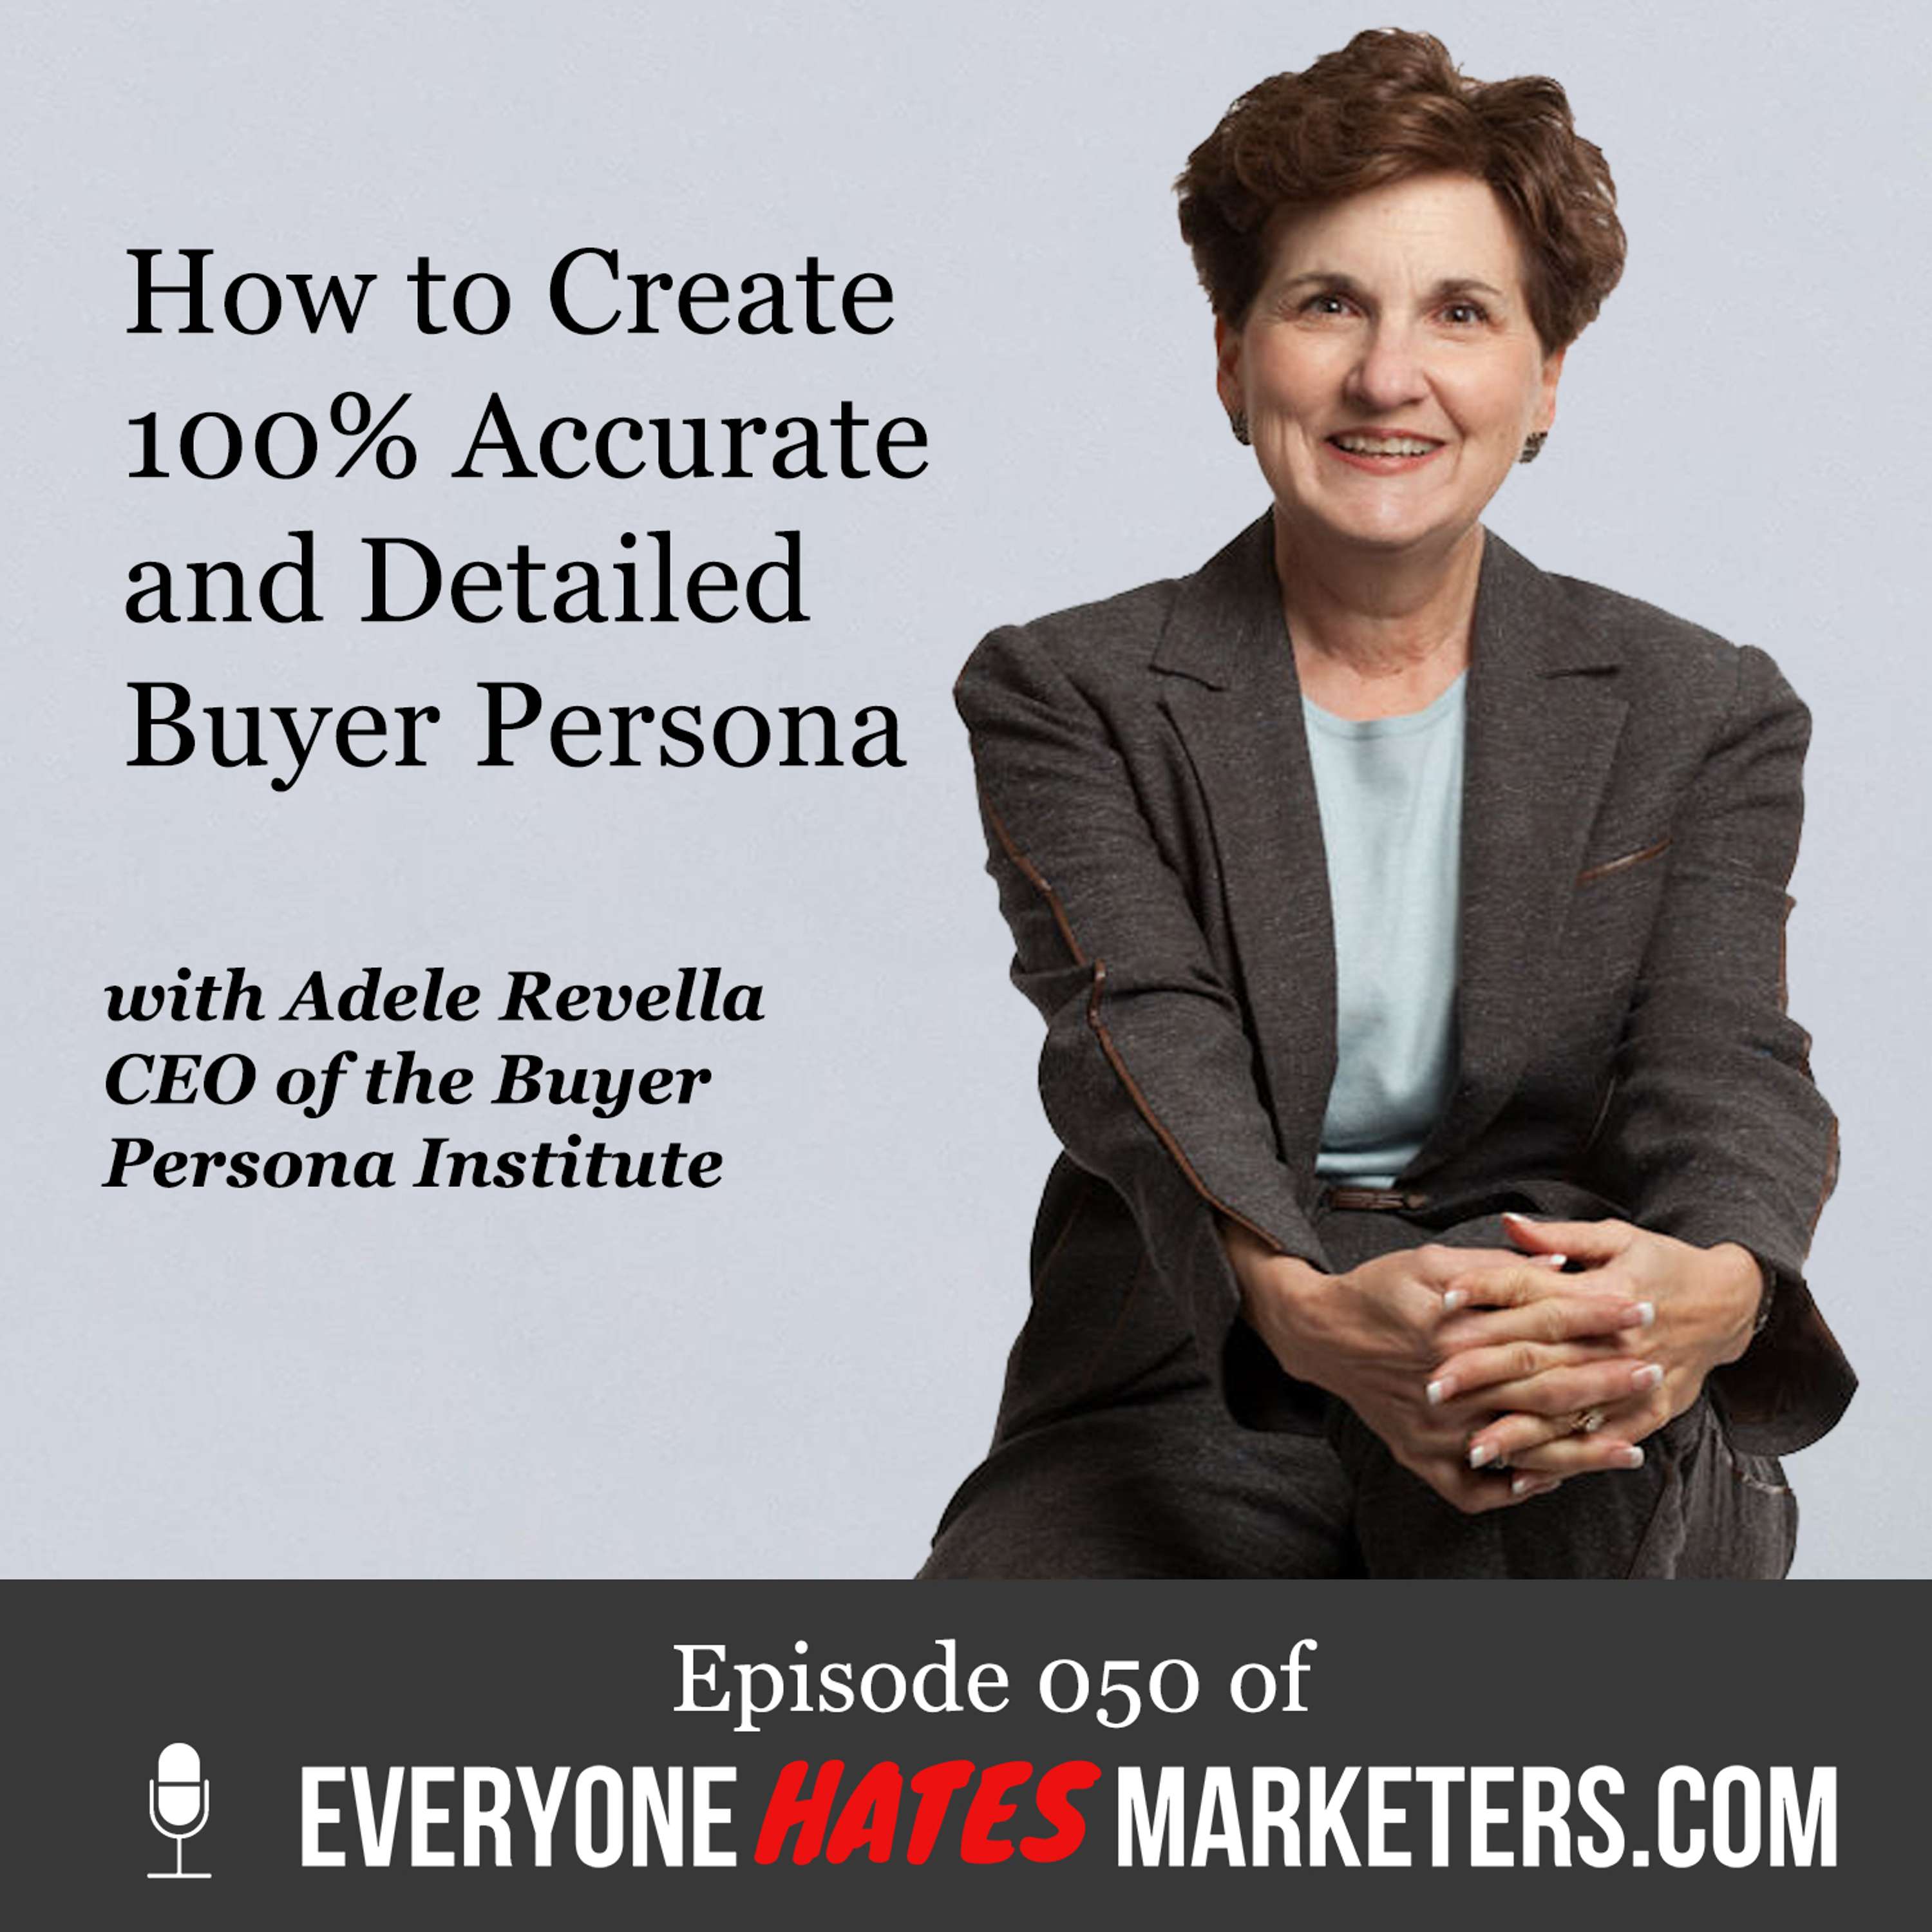 How to Create 100% Accurate and Detailed Buyer Persona